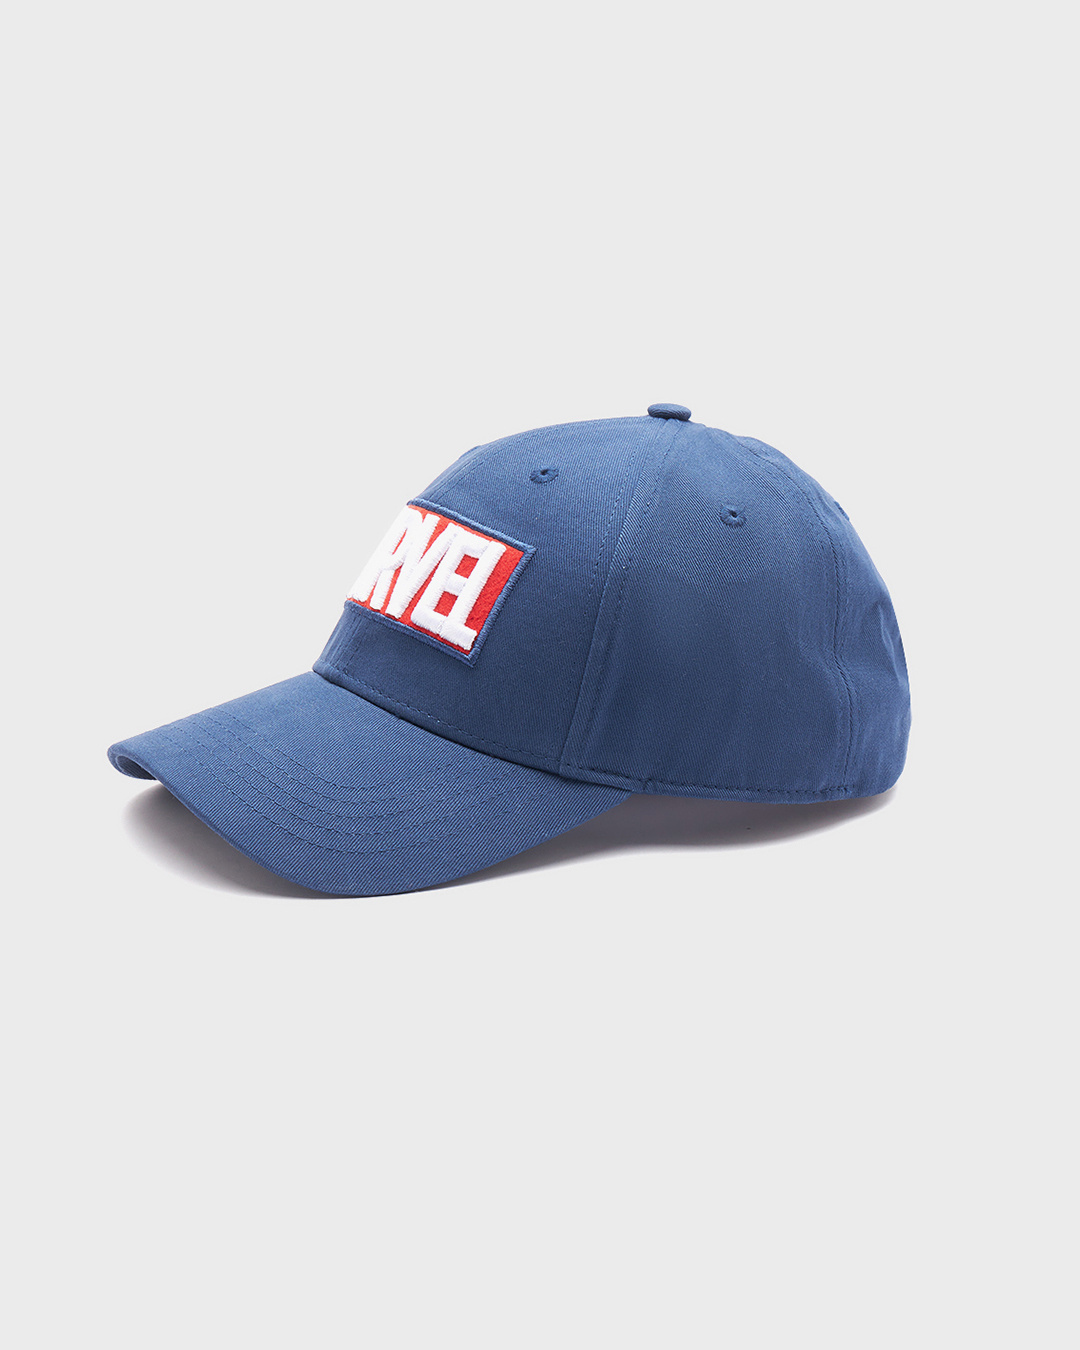 Buy Unisex Blue Marvel Embroidered Baseball Cap Online in India at Bewakoof